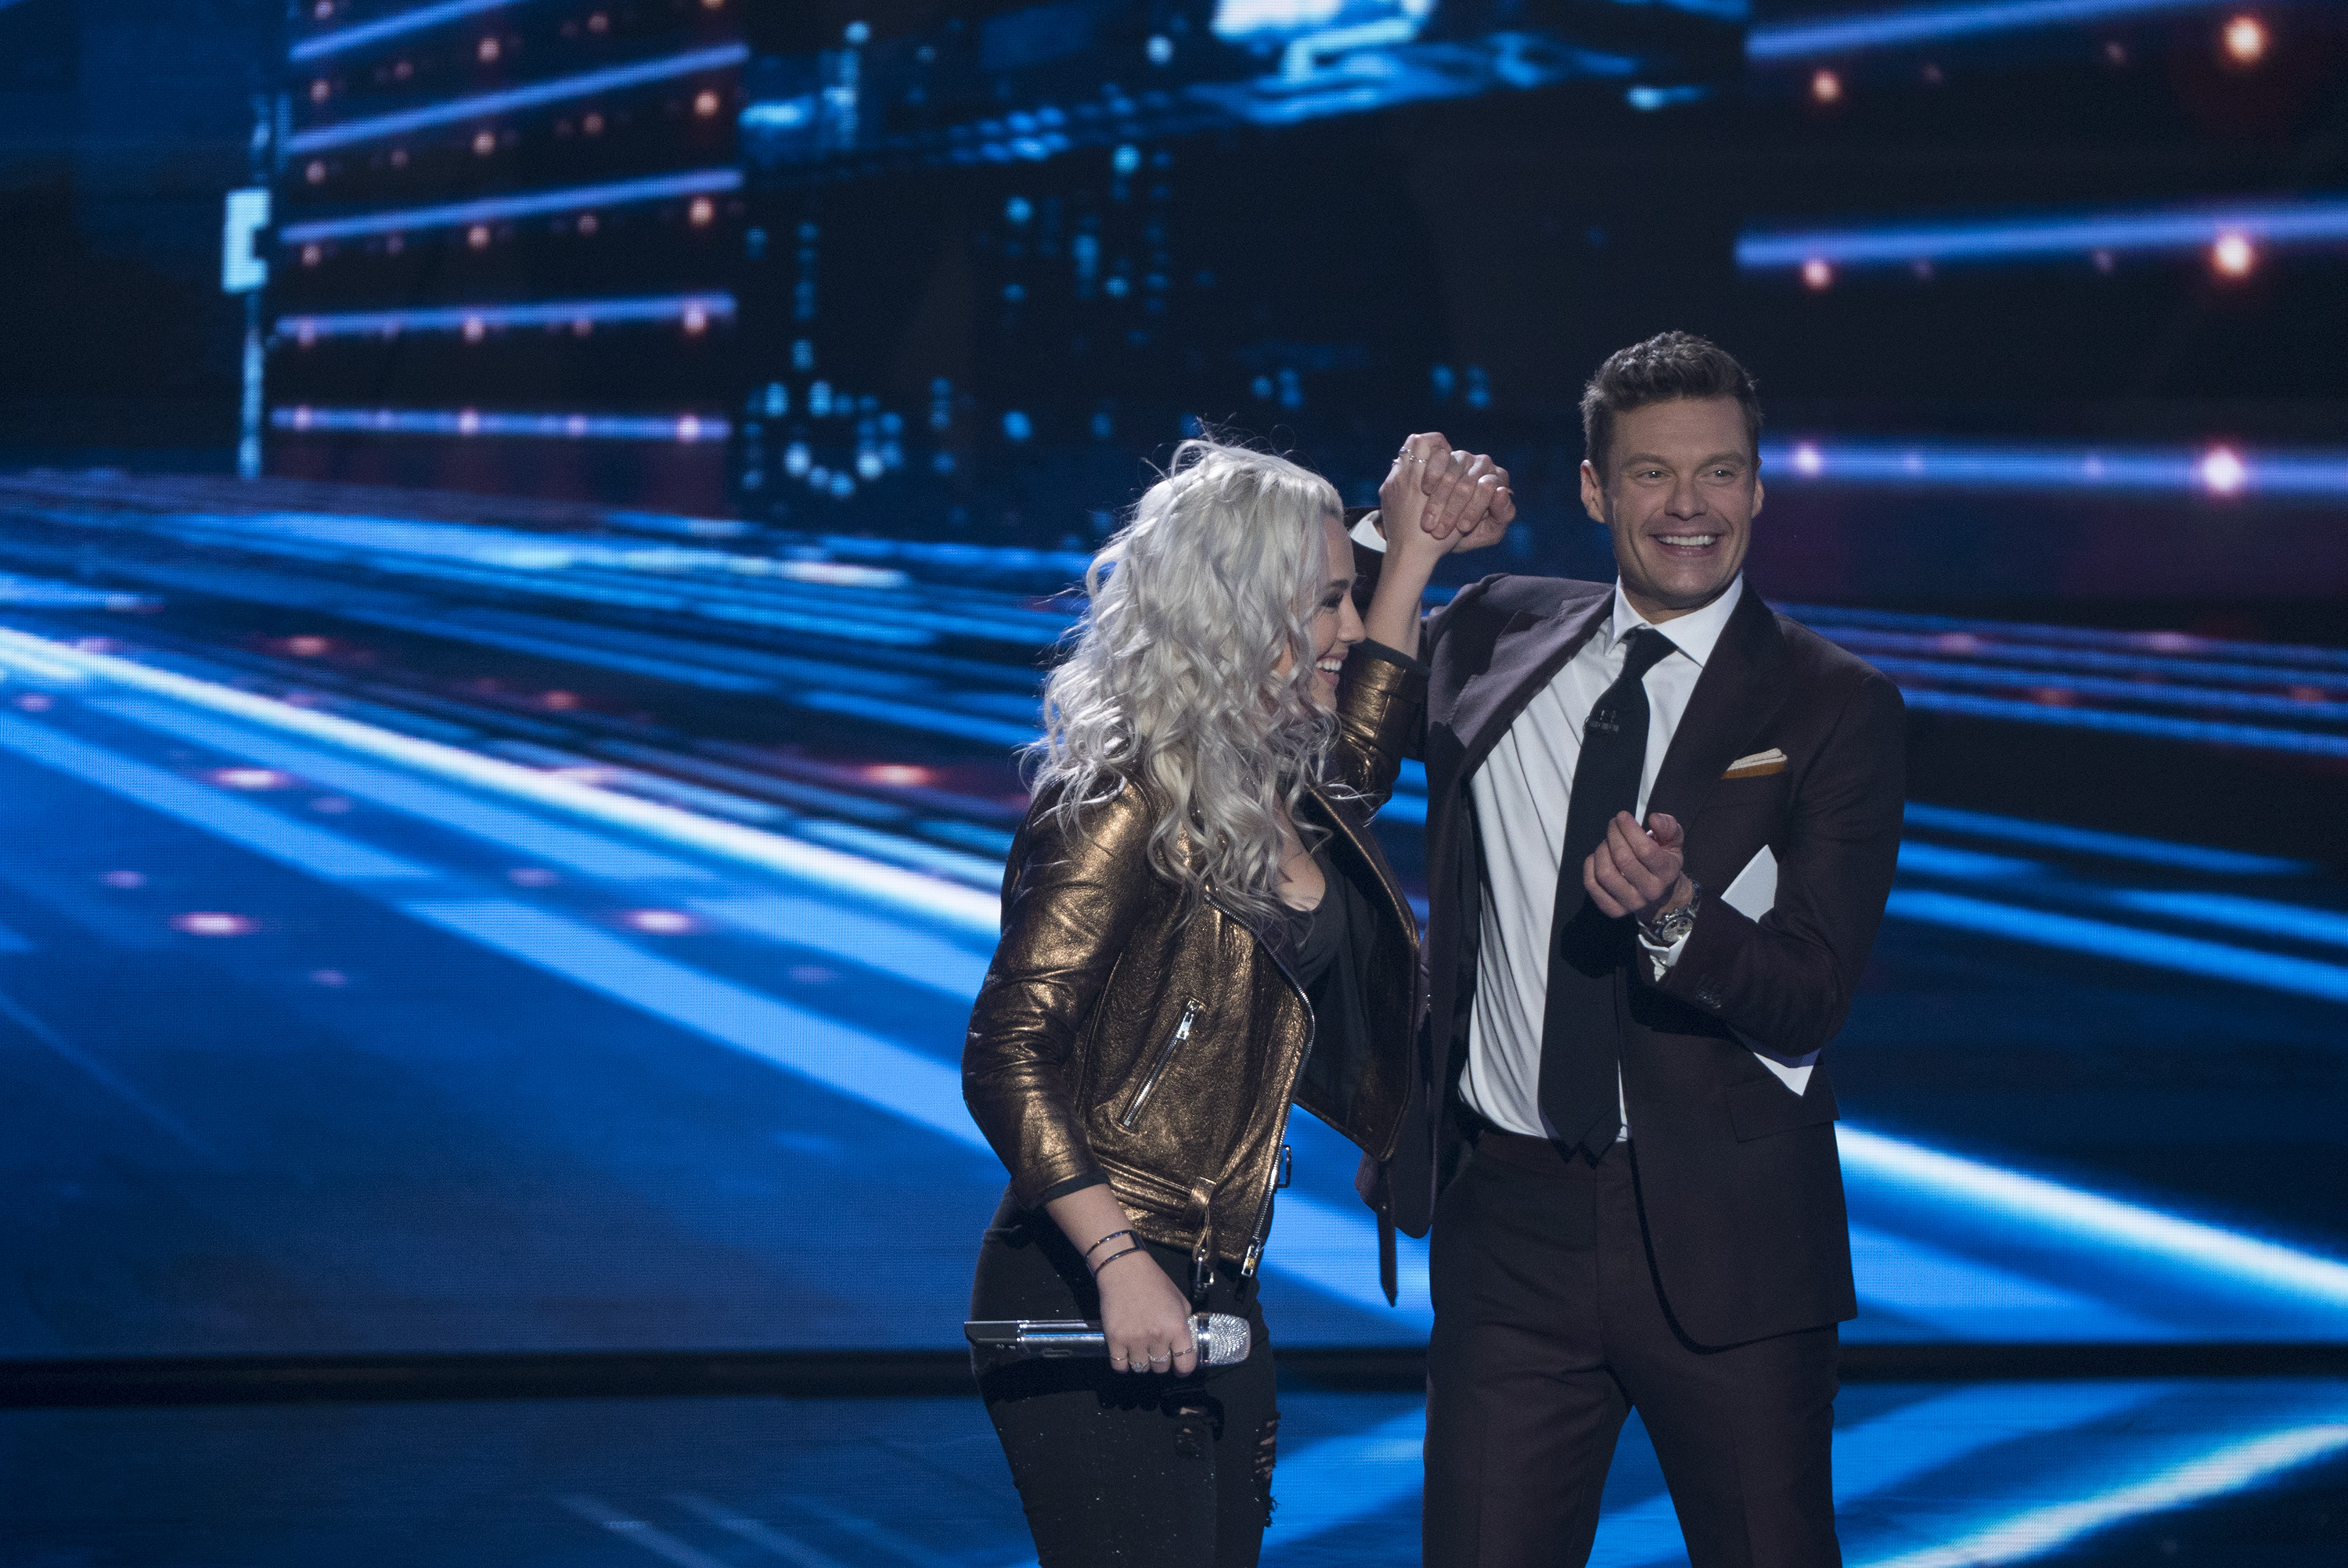 Gabby Barrett and Ryan Seacrest at American Idol which aired live on ABC on April 23, 2018.
Photo credit: American Idol
